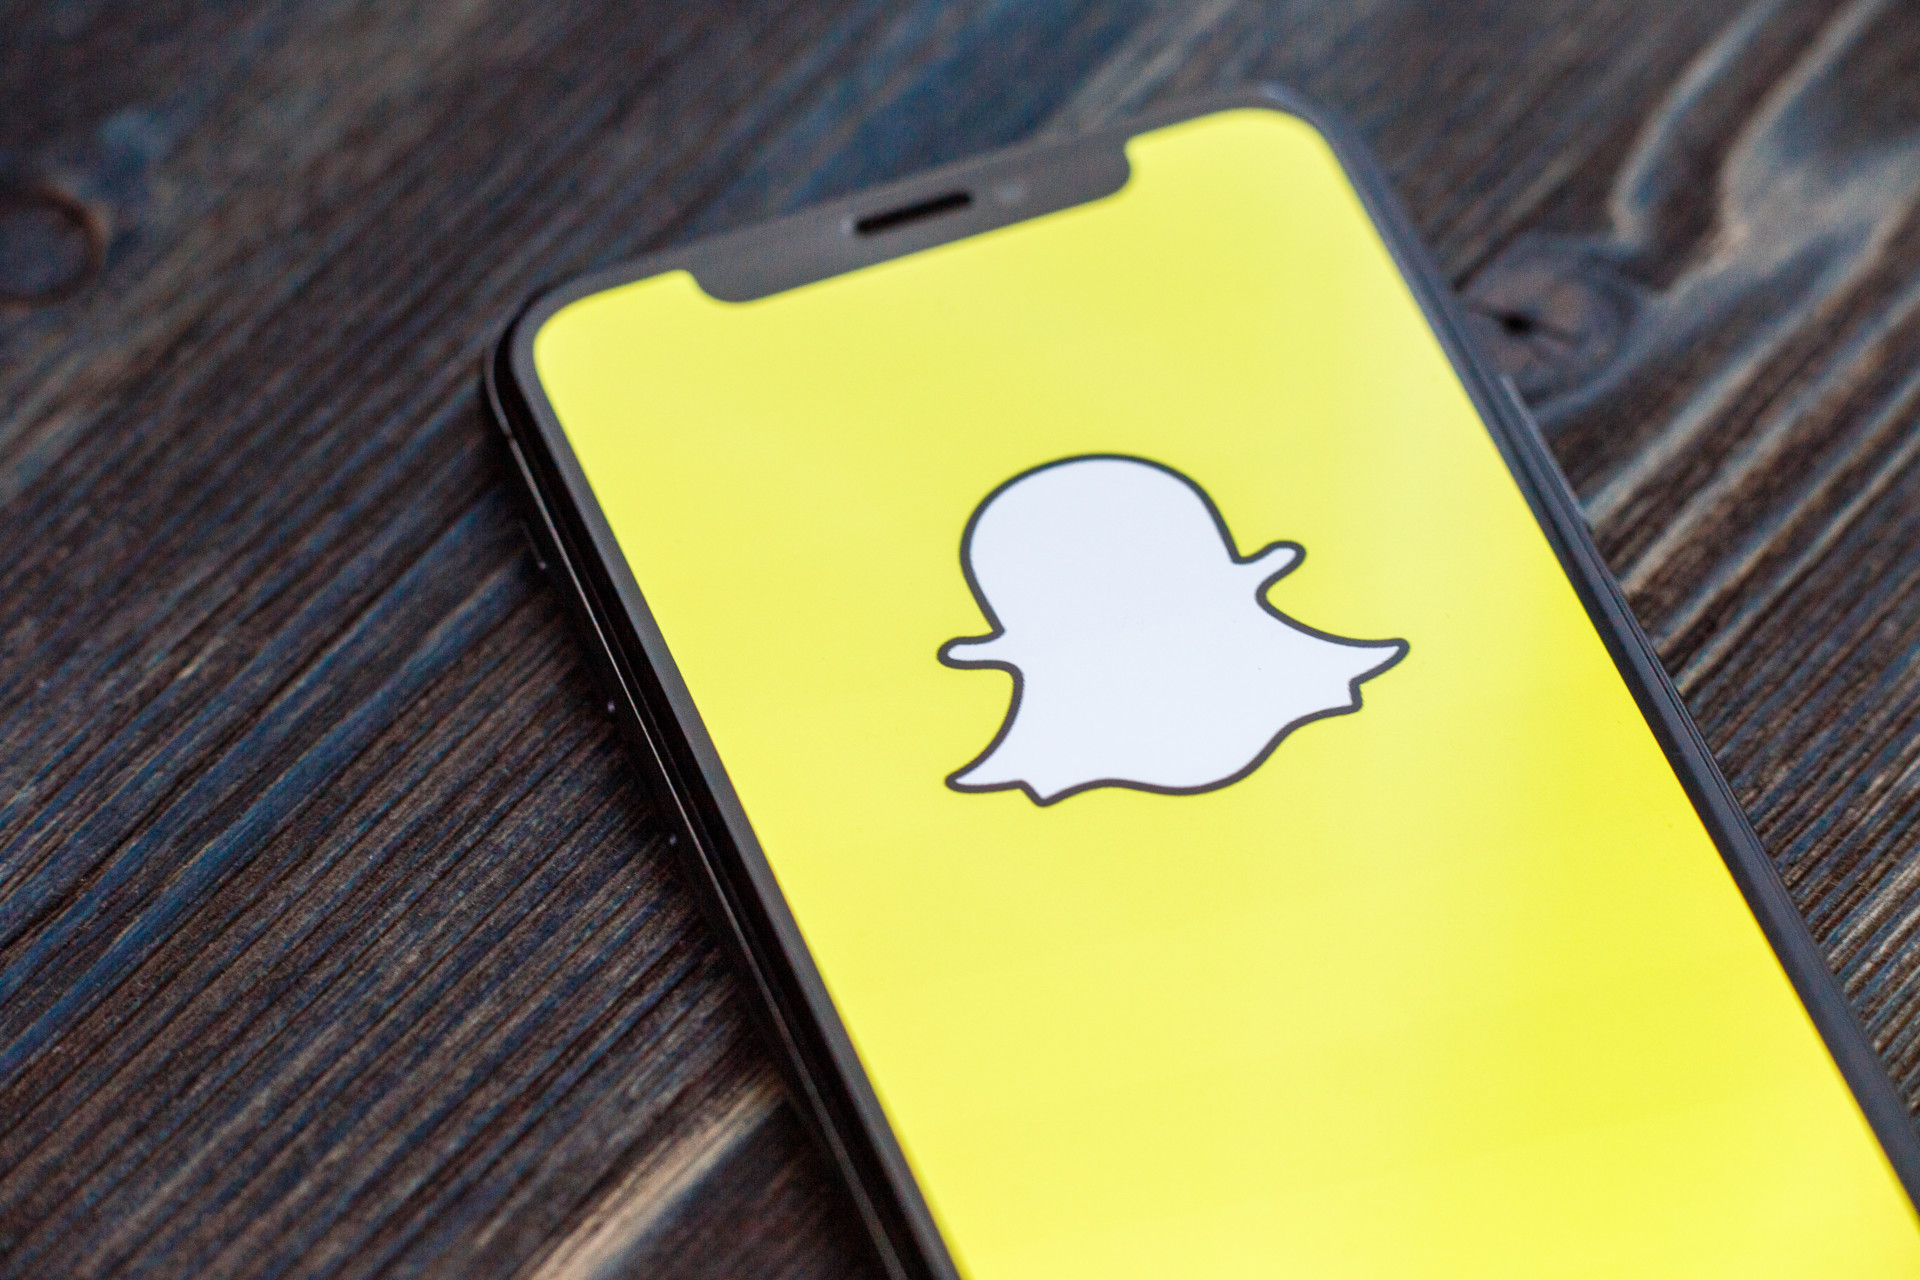 Police investigation launched into inappropriate snapchat messages